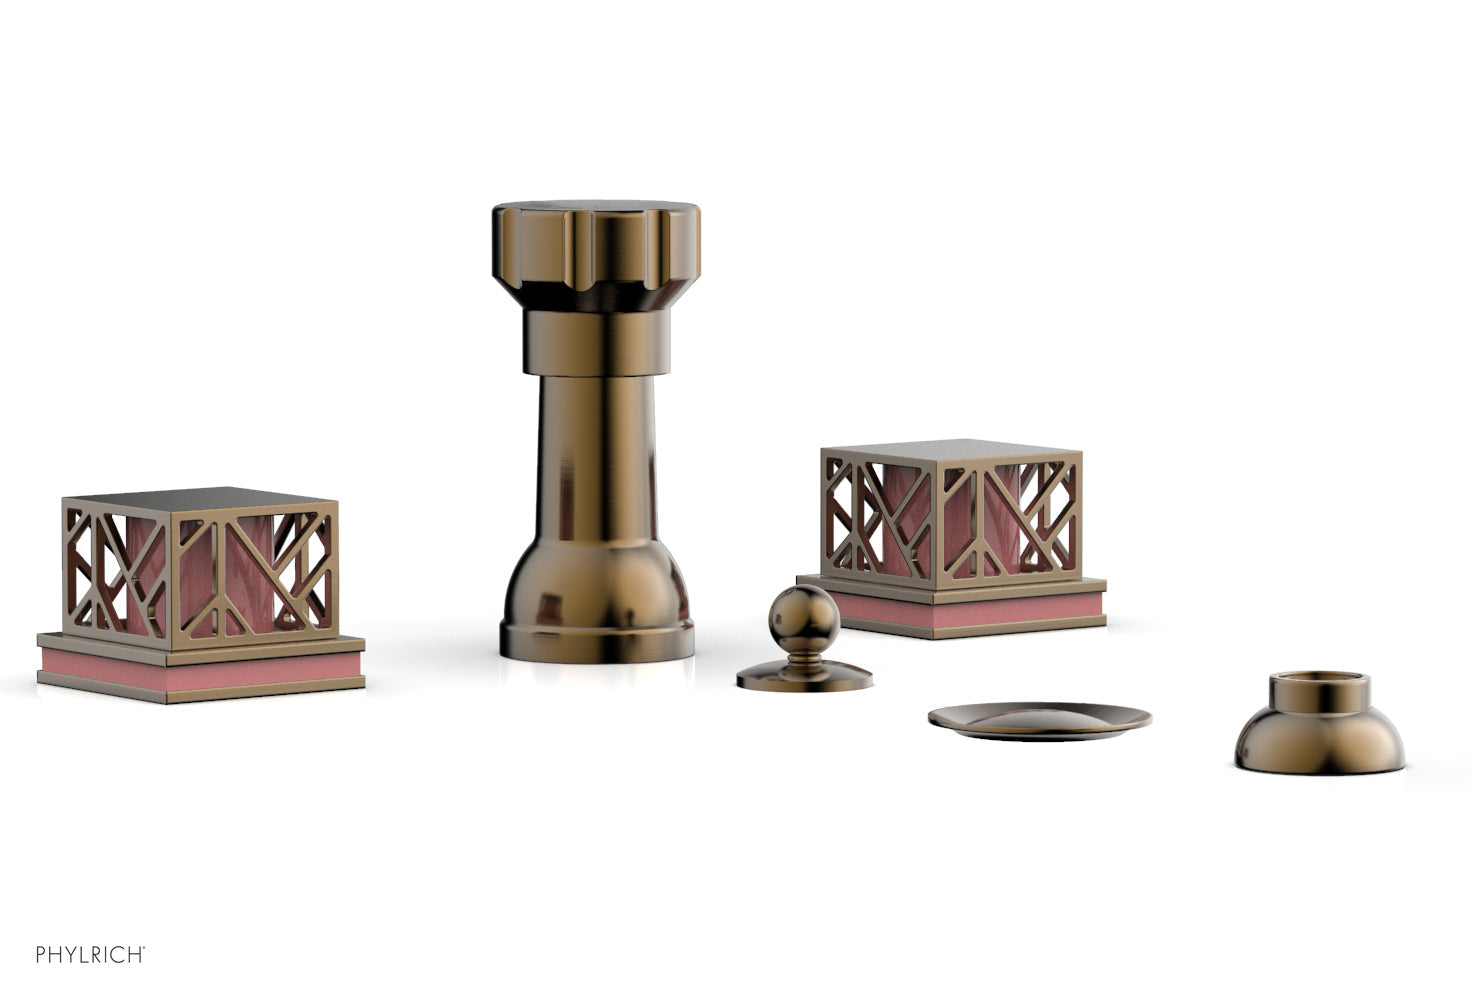 Phylrich JOLIE Four Hole Bidet Set - Square Handles with "Pink Accents"